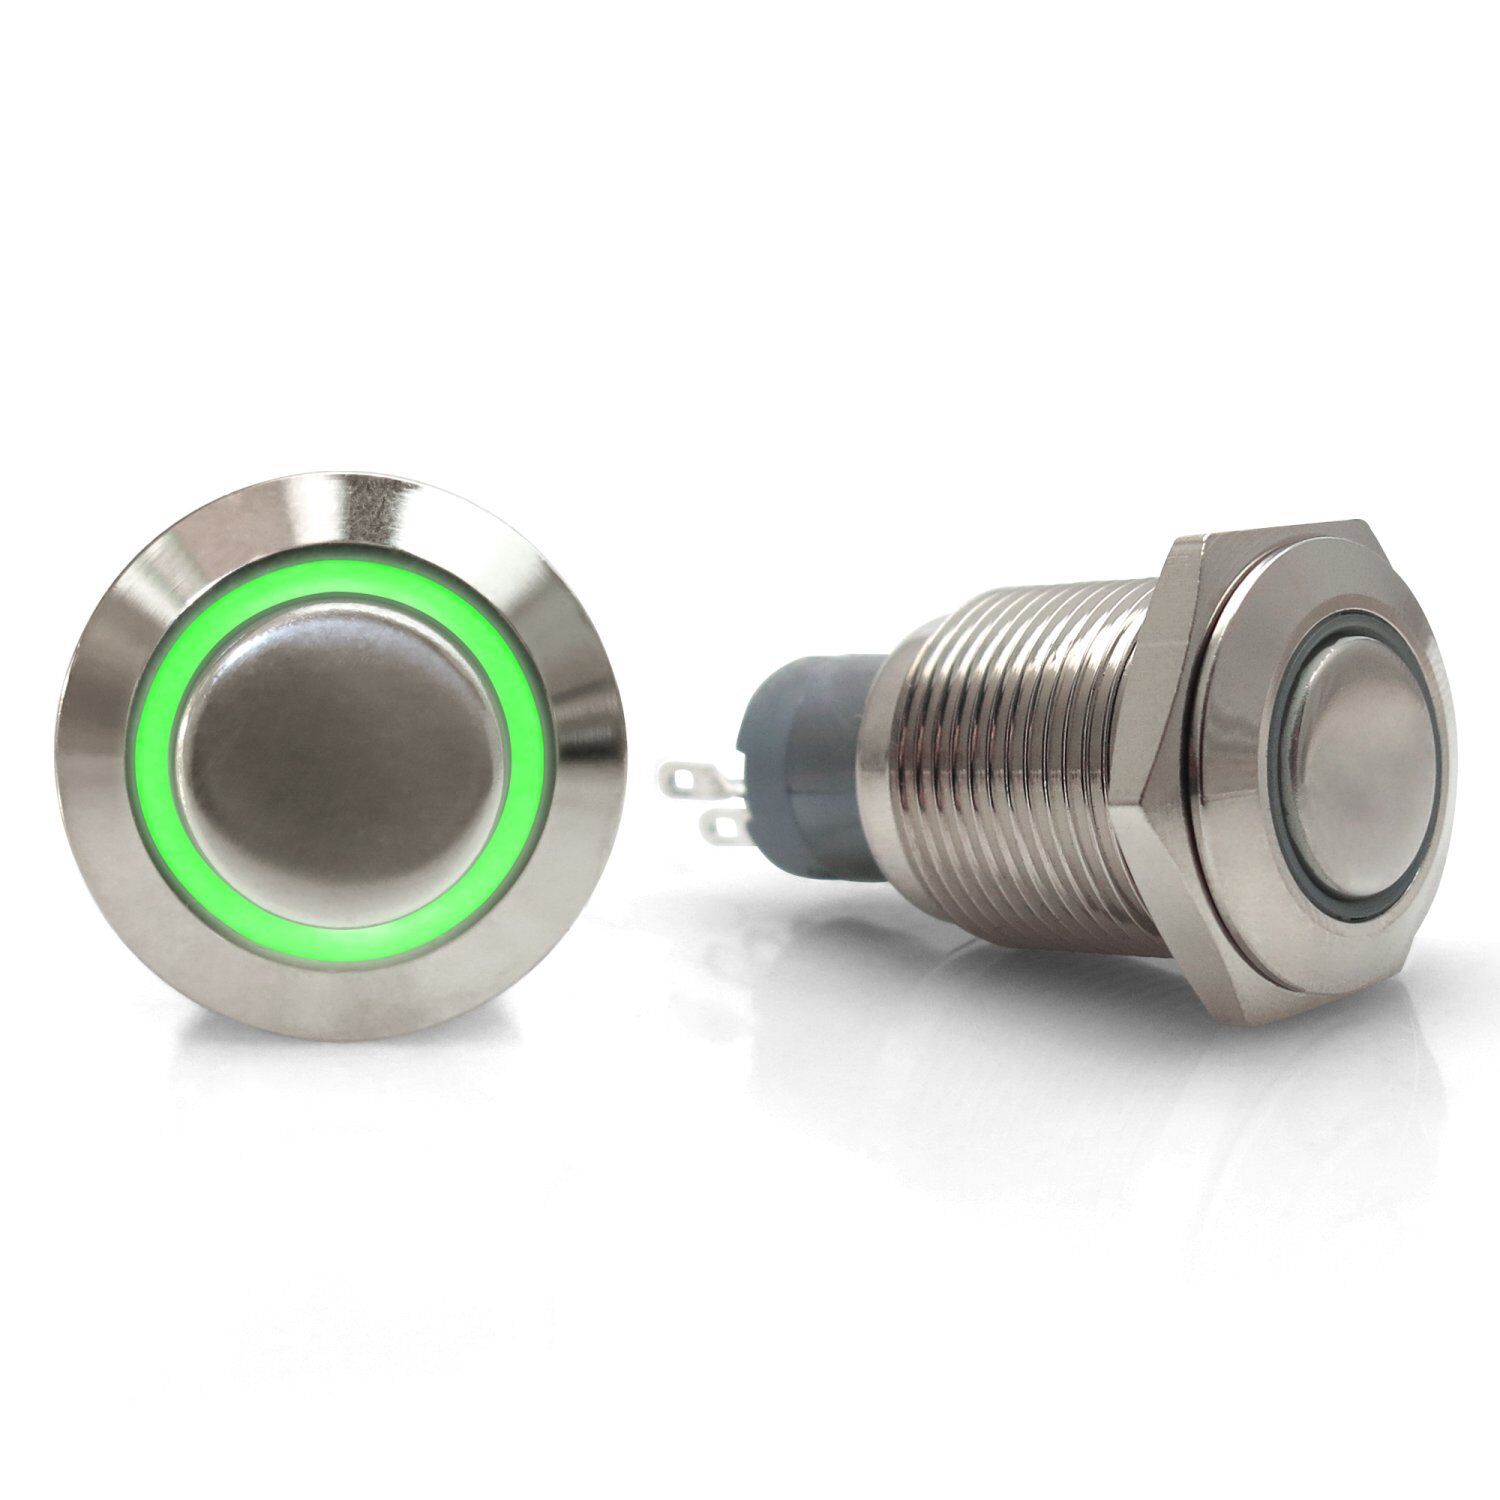 16mm Latching Billet Button with LED Green Ring SW39G rat muscle